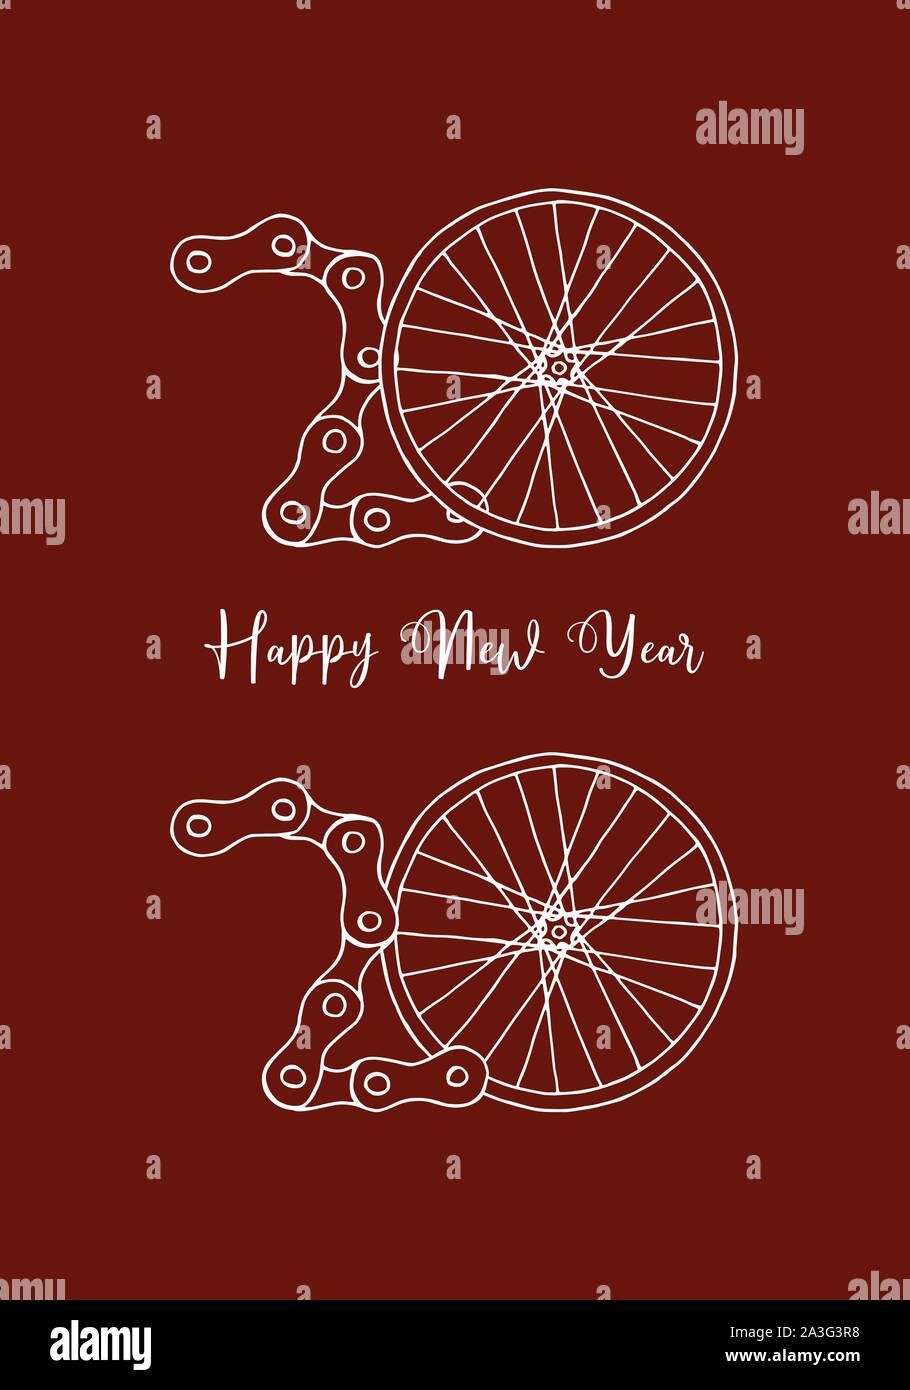 2020 Hand drawn Bicycle Happy New Year vector illustration on red background Stock Vector